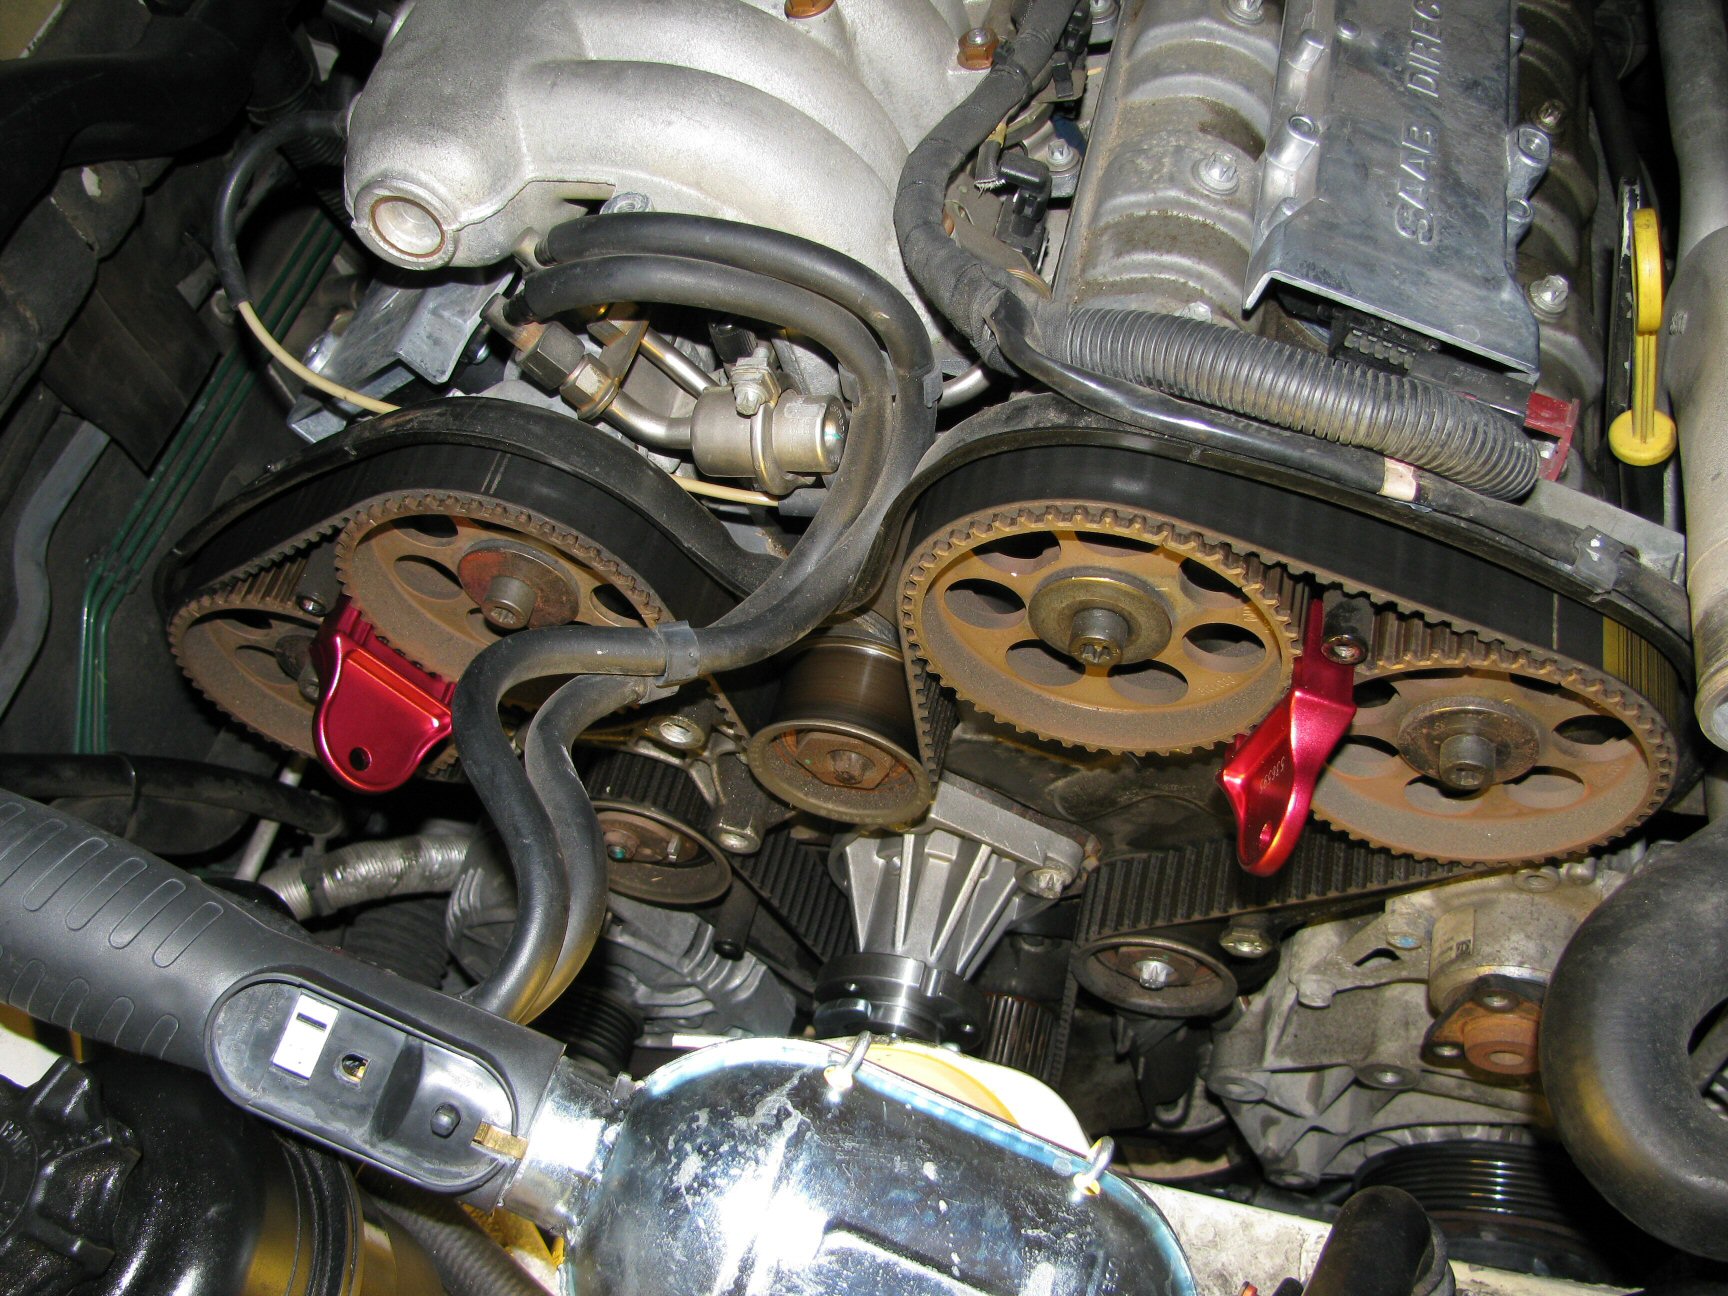 Timing belt and pulleys exposed. Camshaft pulleys 1 (left) through 4 (right).